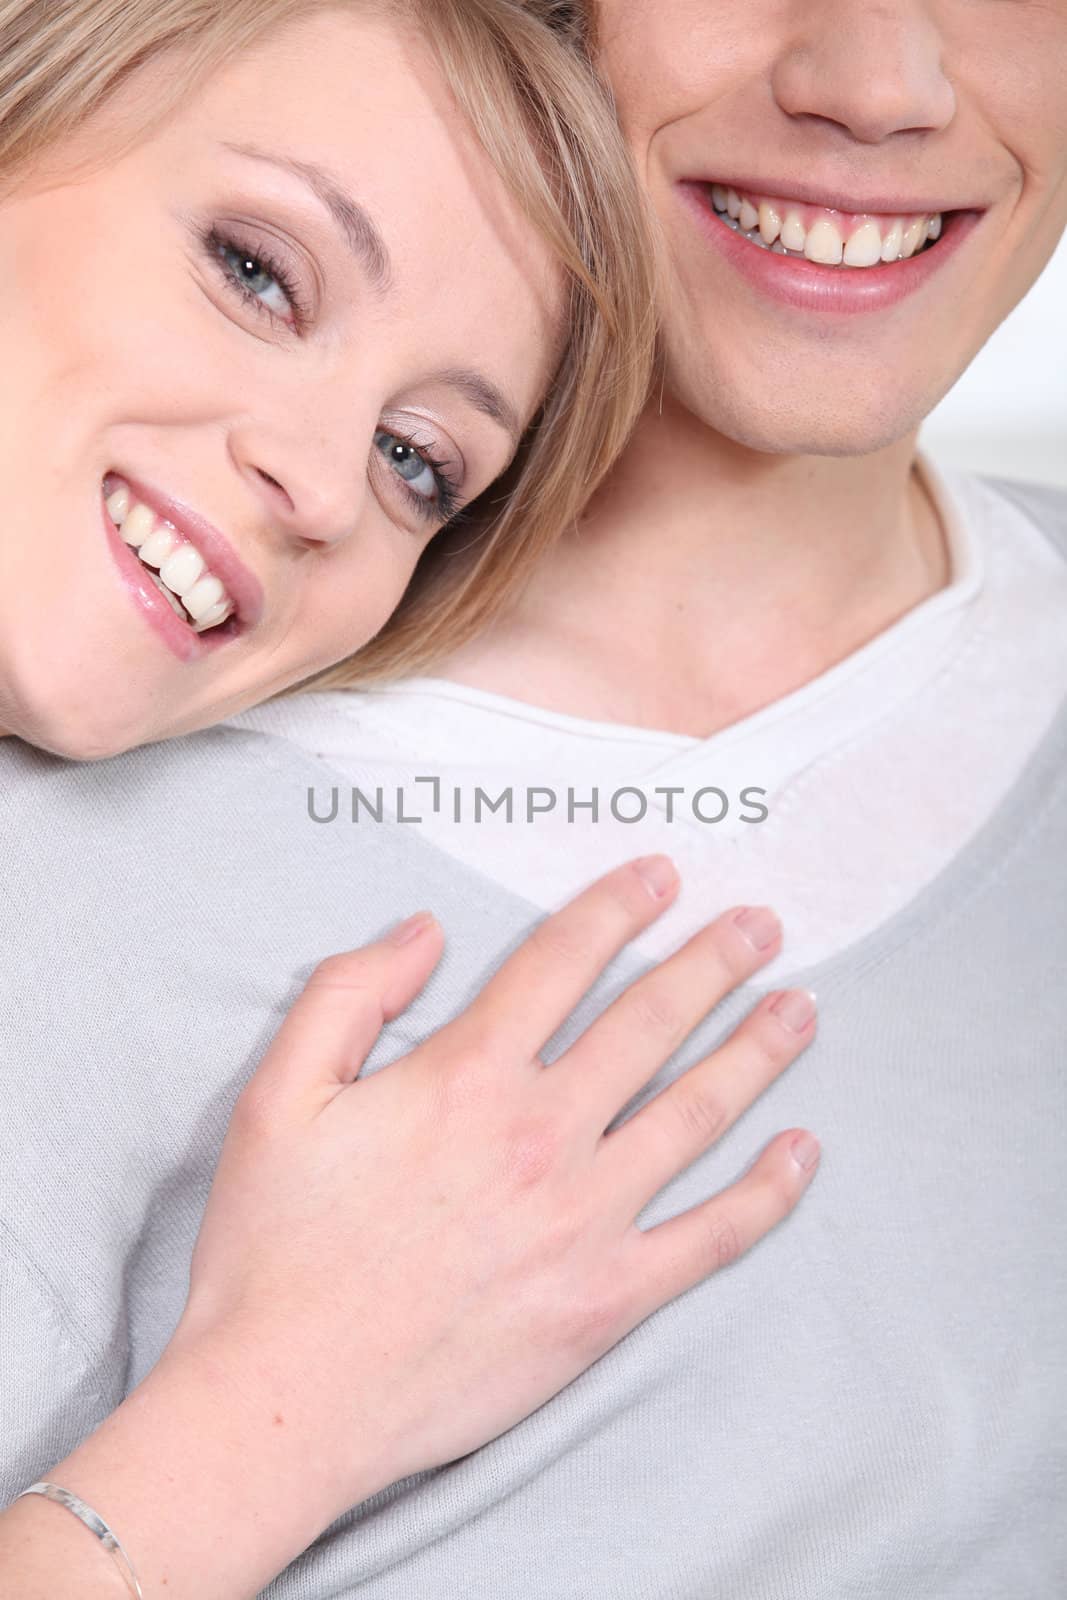 Smiling young couple by phovoir